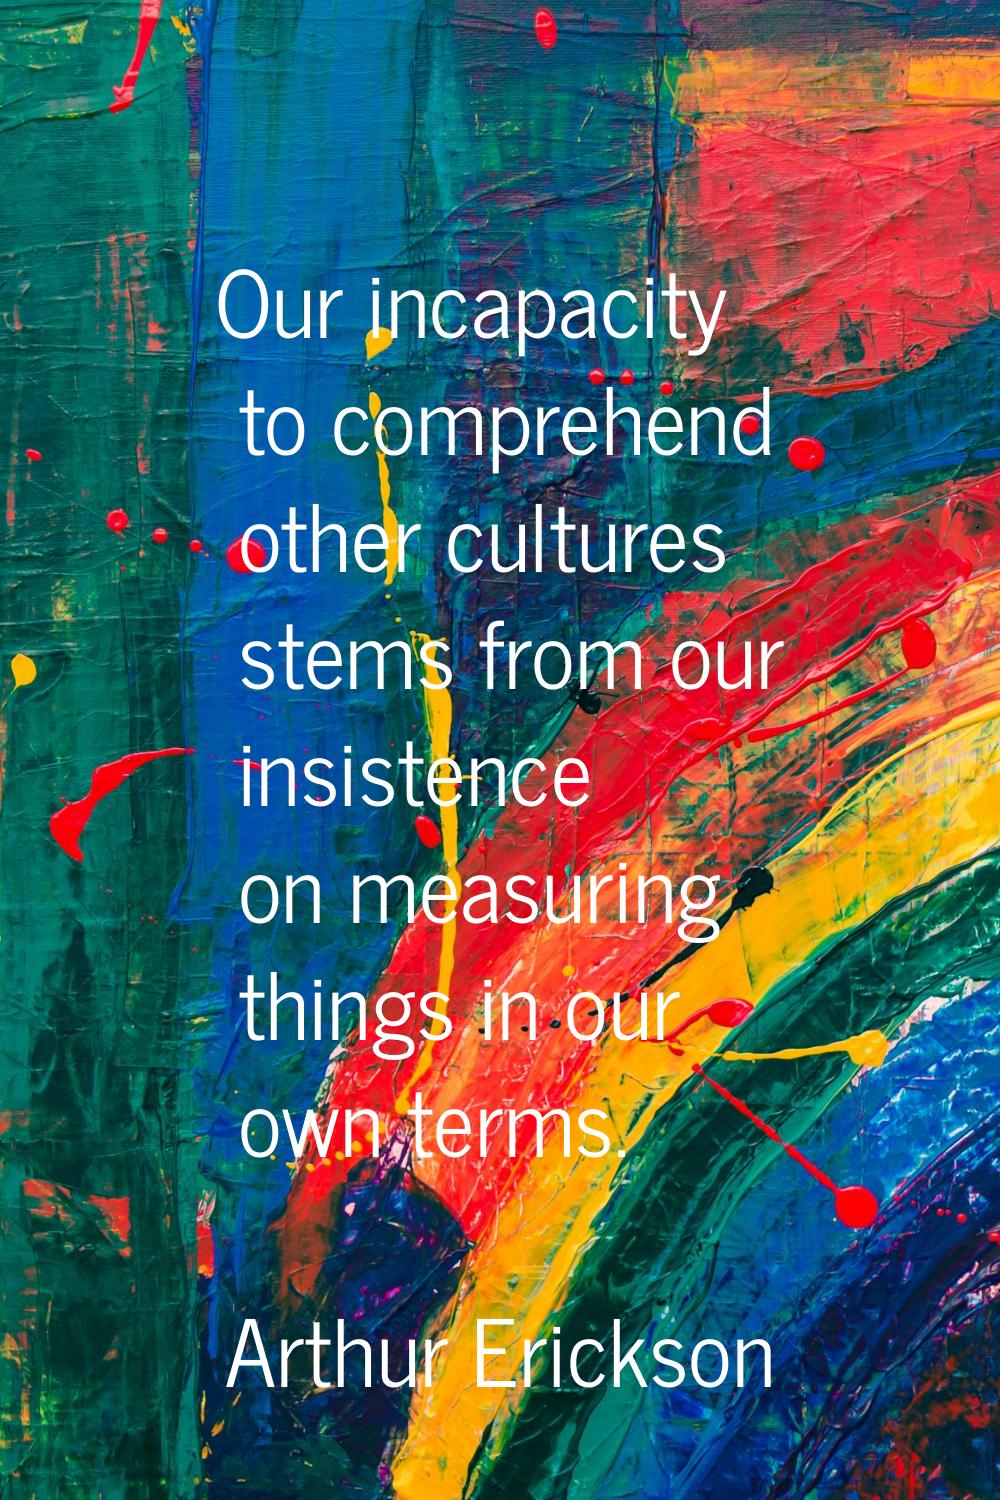 Our incapacity to comprehend other cultures stems from our insistence on measuring things in our ow